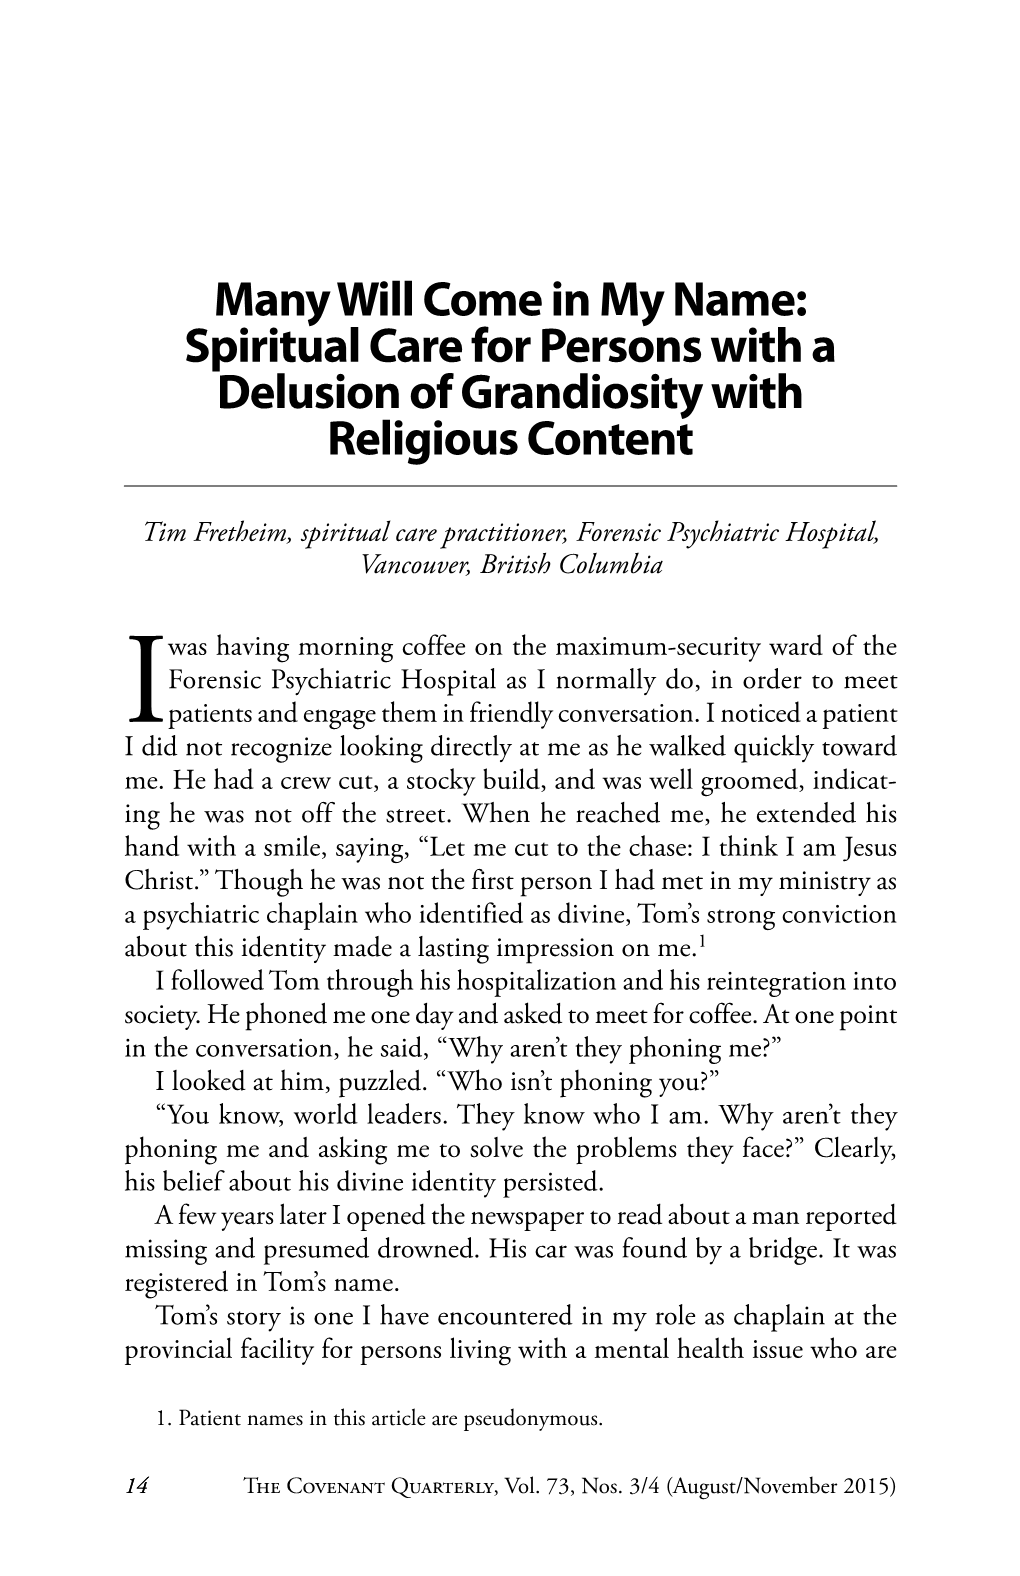 Spiritual Care for Persons with a Delusion of Grandiosity with Religious Content